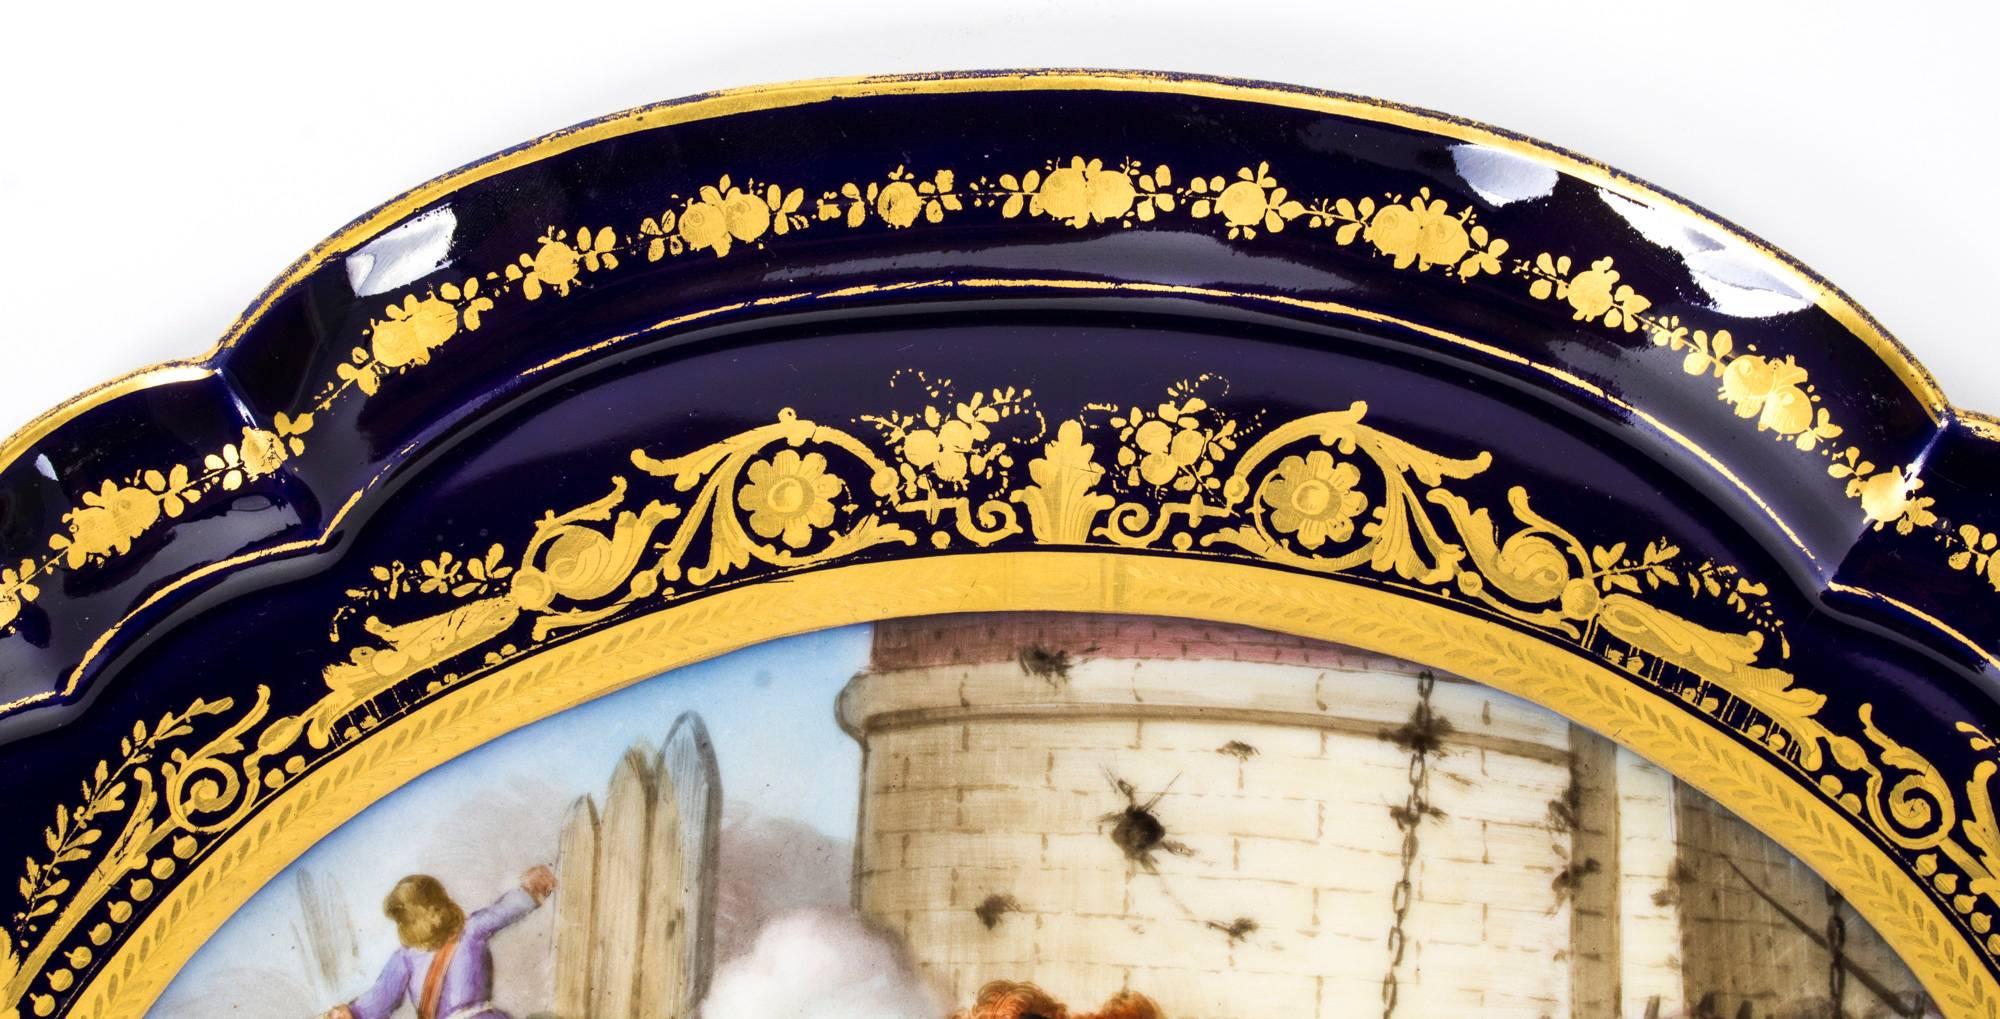 This is an absolutely fabulous antique Sevres porcelain oval two-handled tray, dating from the mid-19th century.

Beautifully hand-painted and commemorating a 1677 battle scene, the 